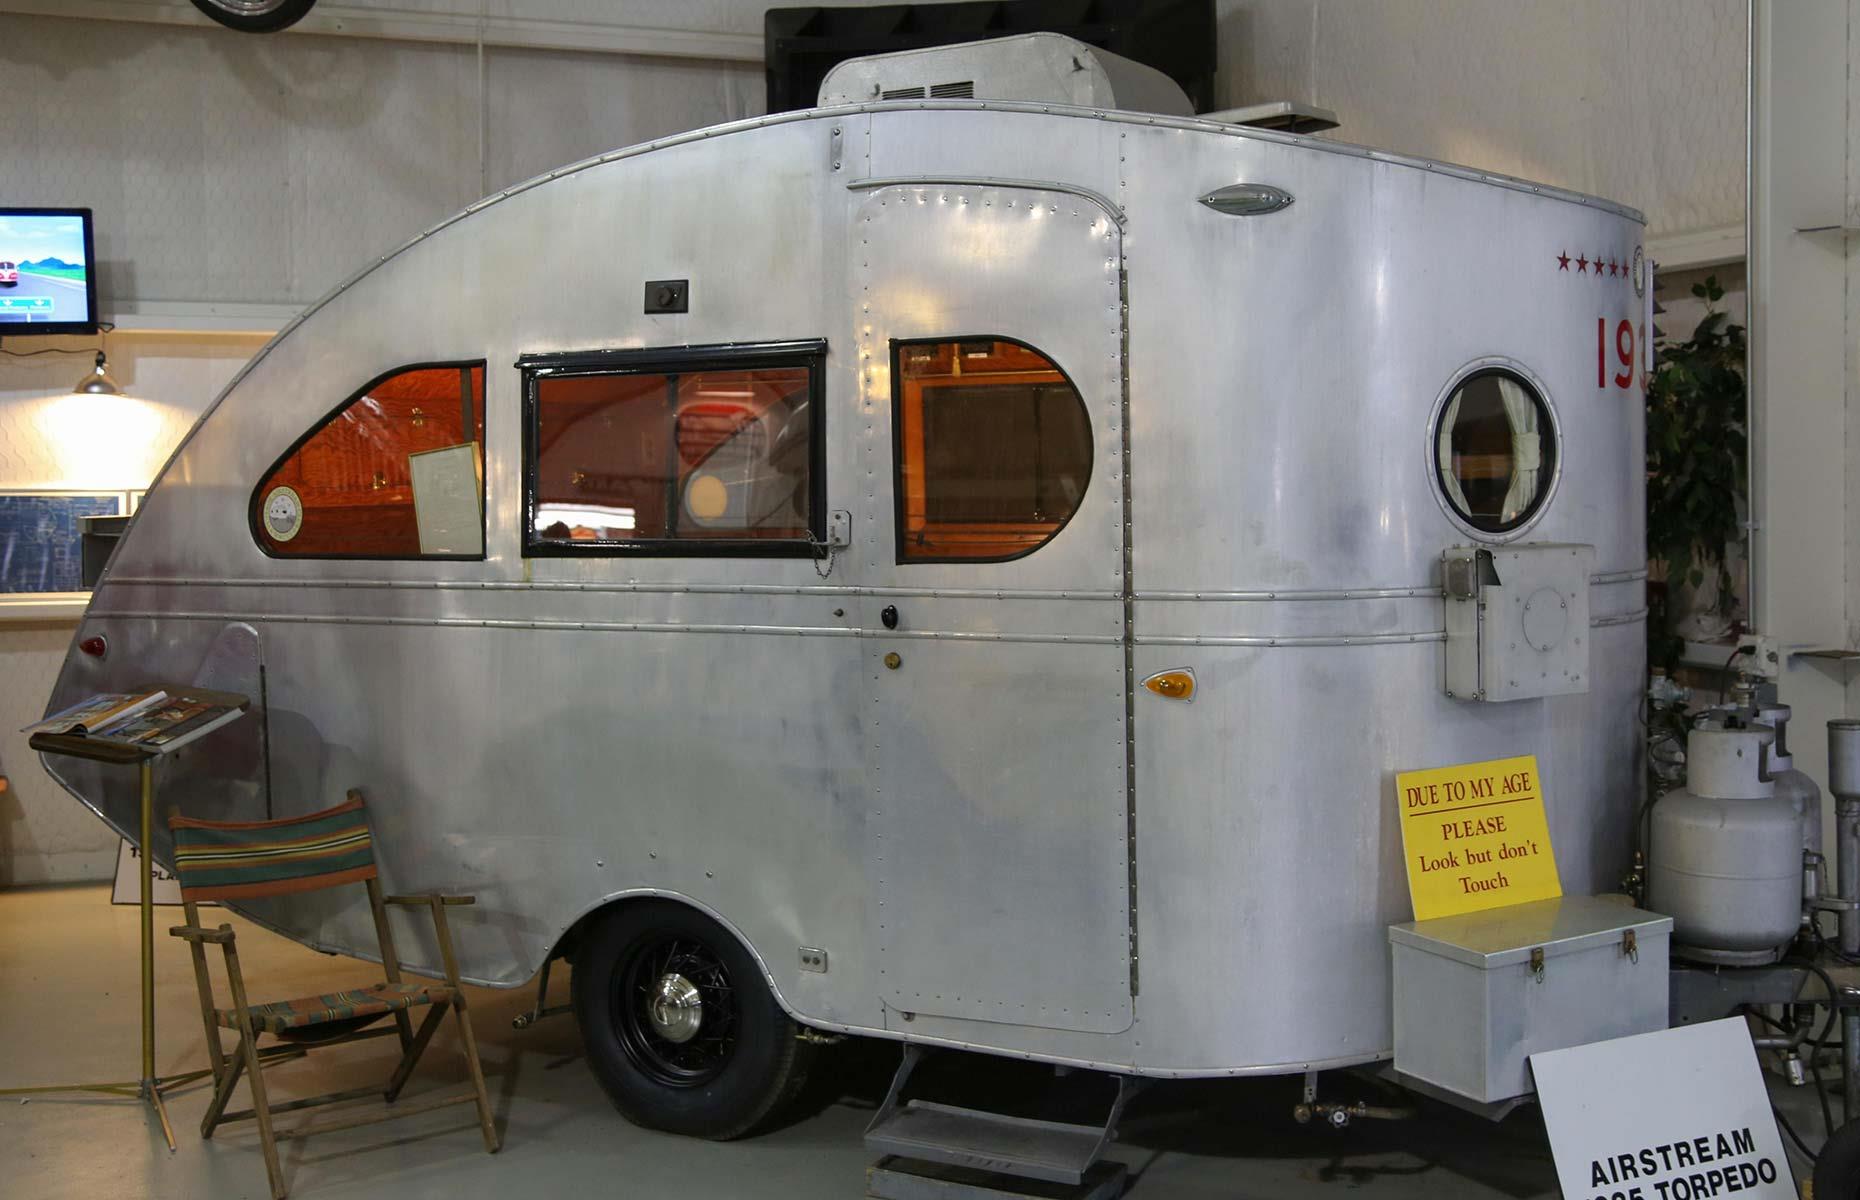 <p>The fledgling firm completed its first factory-produced model, the Torpedo (pictured), in 1932, and launched two larger models soon after: the Silver Cloud and the Airlite.</p>  <p>A couple of years later, Wally Byam adopted the name "Airstream", a perfect moniker for the company's teardrop-shaped trailers, which cruised down the road "like a stream of air".</p>